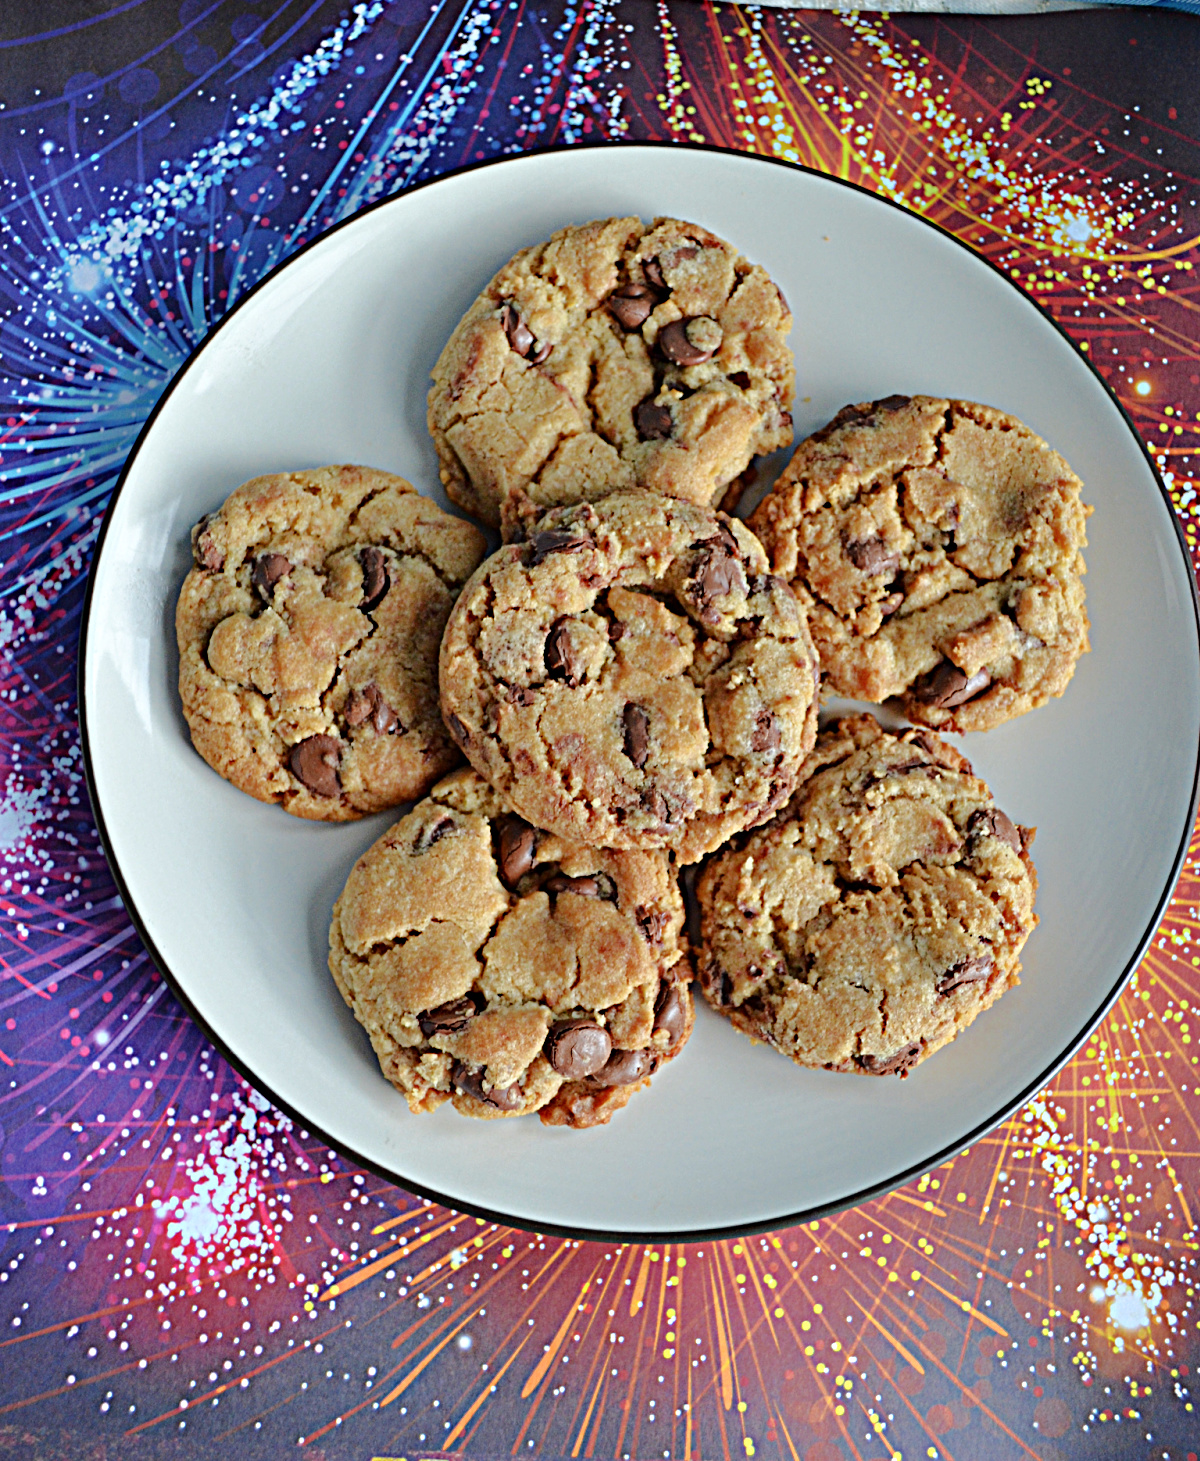 Perfect Chocolate Chip Cookies from Cook’s Illustrated